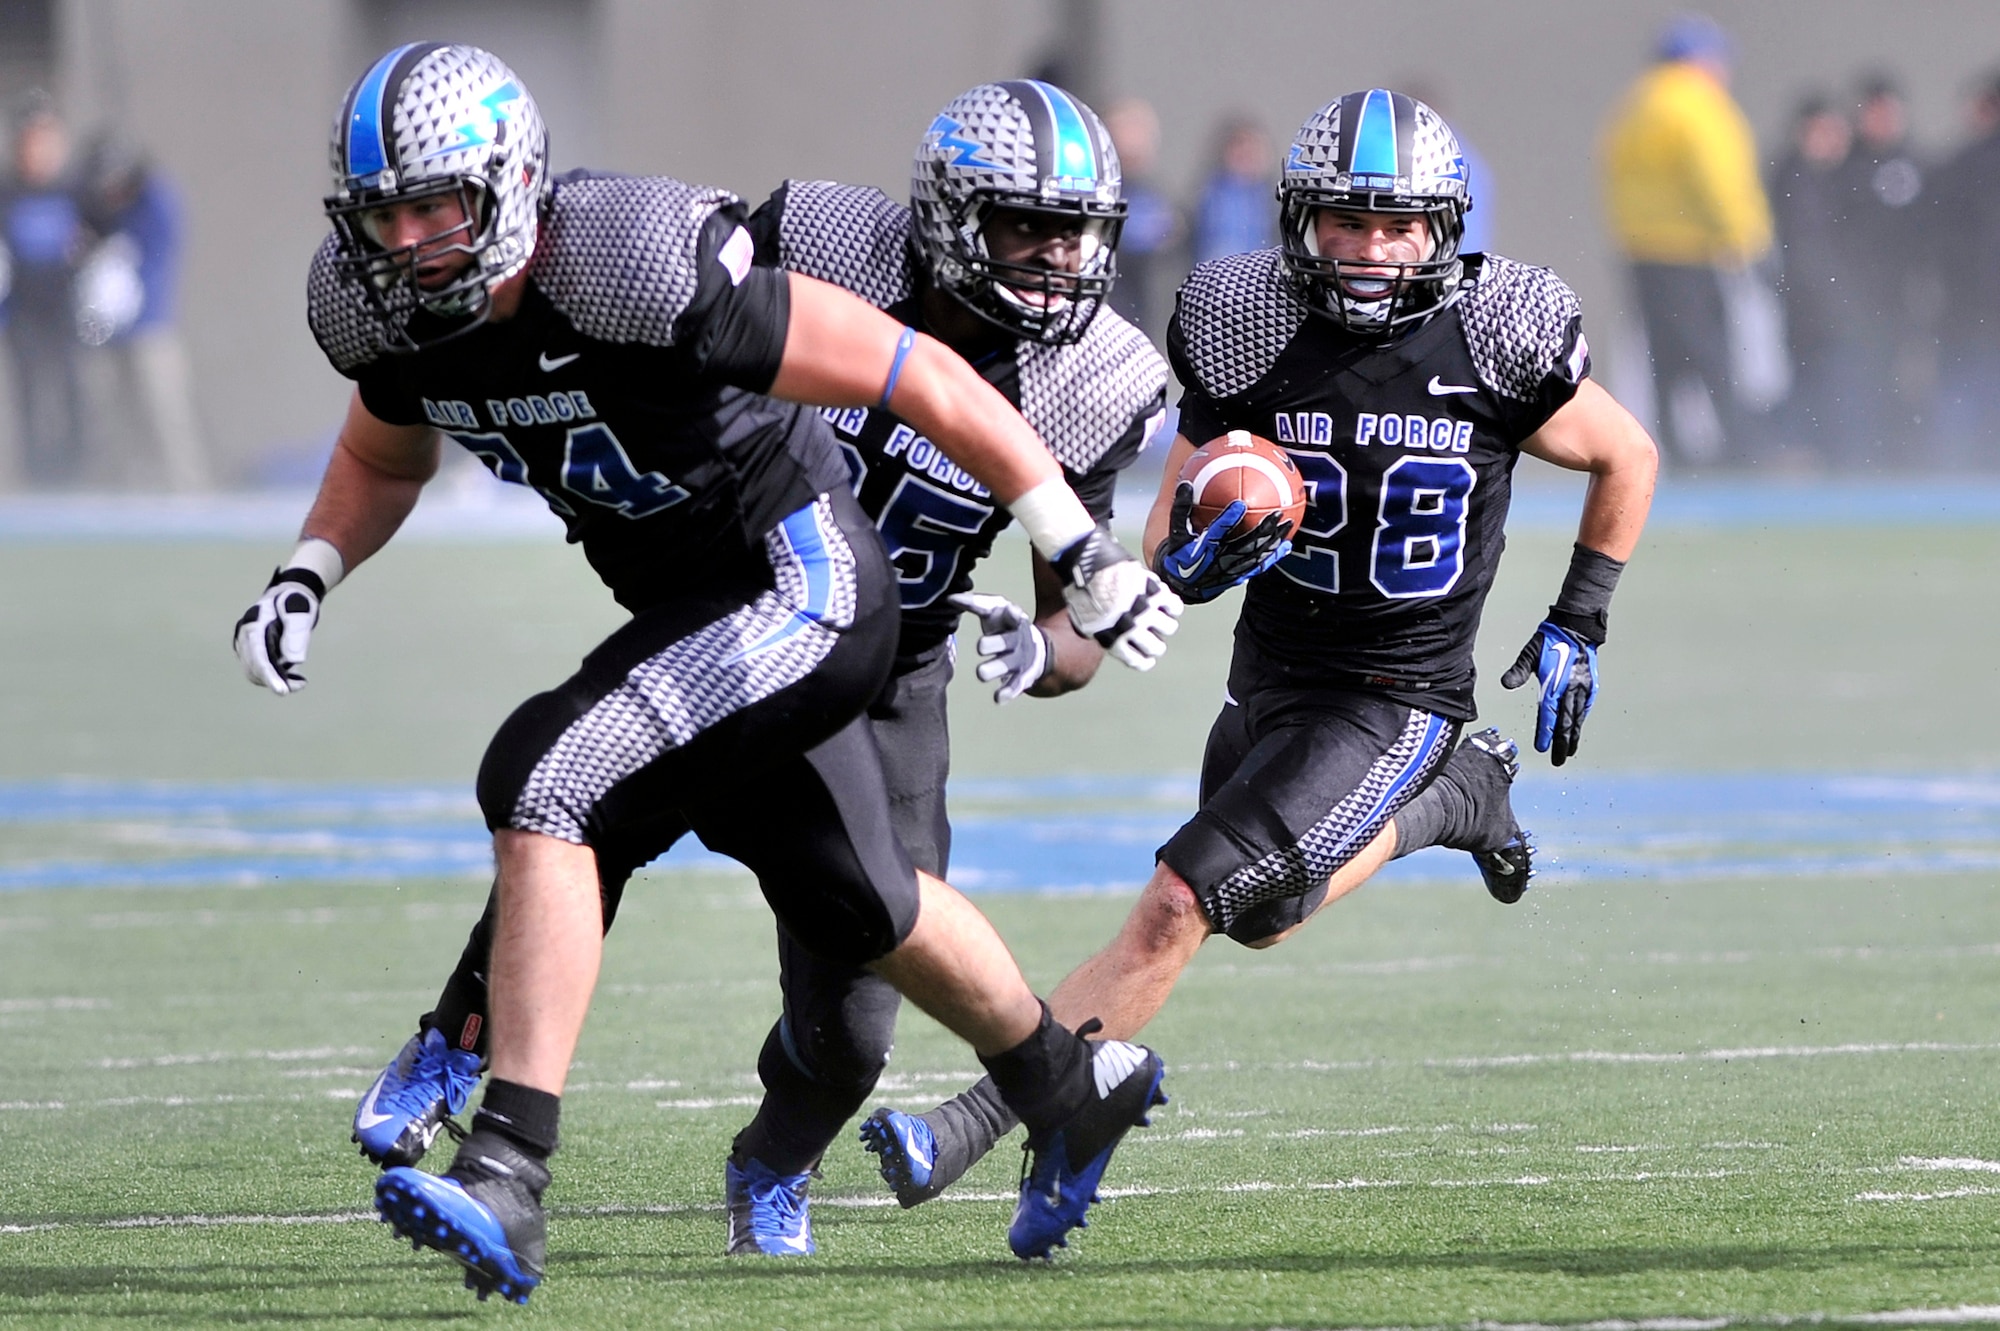 Falcons running back Cody Getz, right, follows his blockers during the Navy-Air Force football game at Falcon Stadium Oct. 6, 2012. Getz had 27 rushes for 206 yards, making him the first player in Air Force history and the second player in Mountain West Conference history with three 200-yard games in one season. (U.S. Air Force photo/Raymond McCoy)